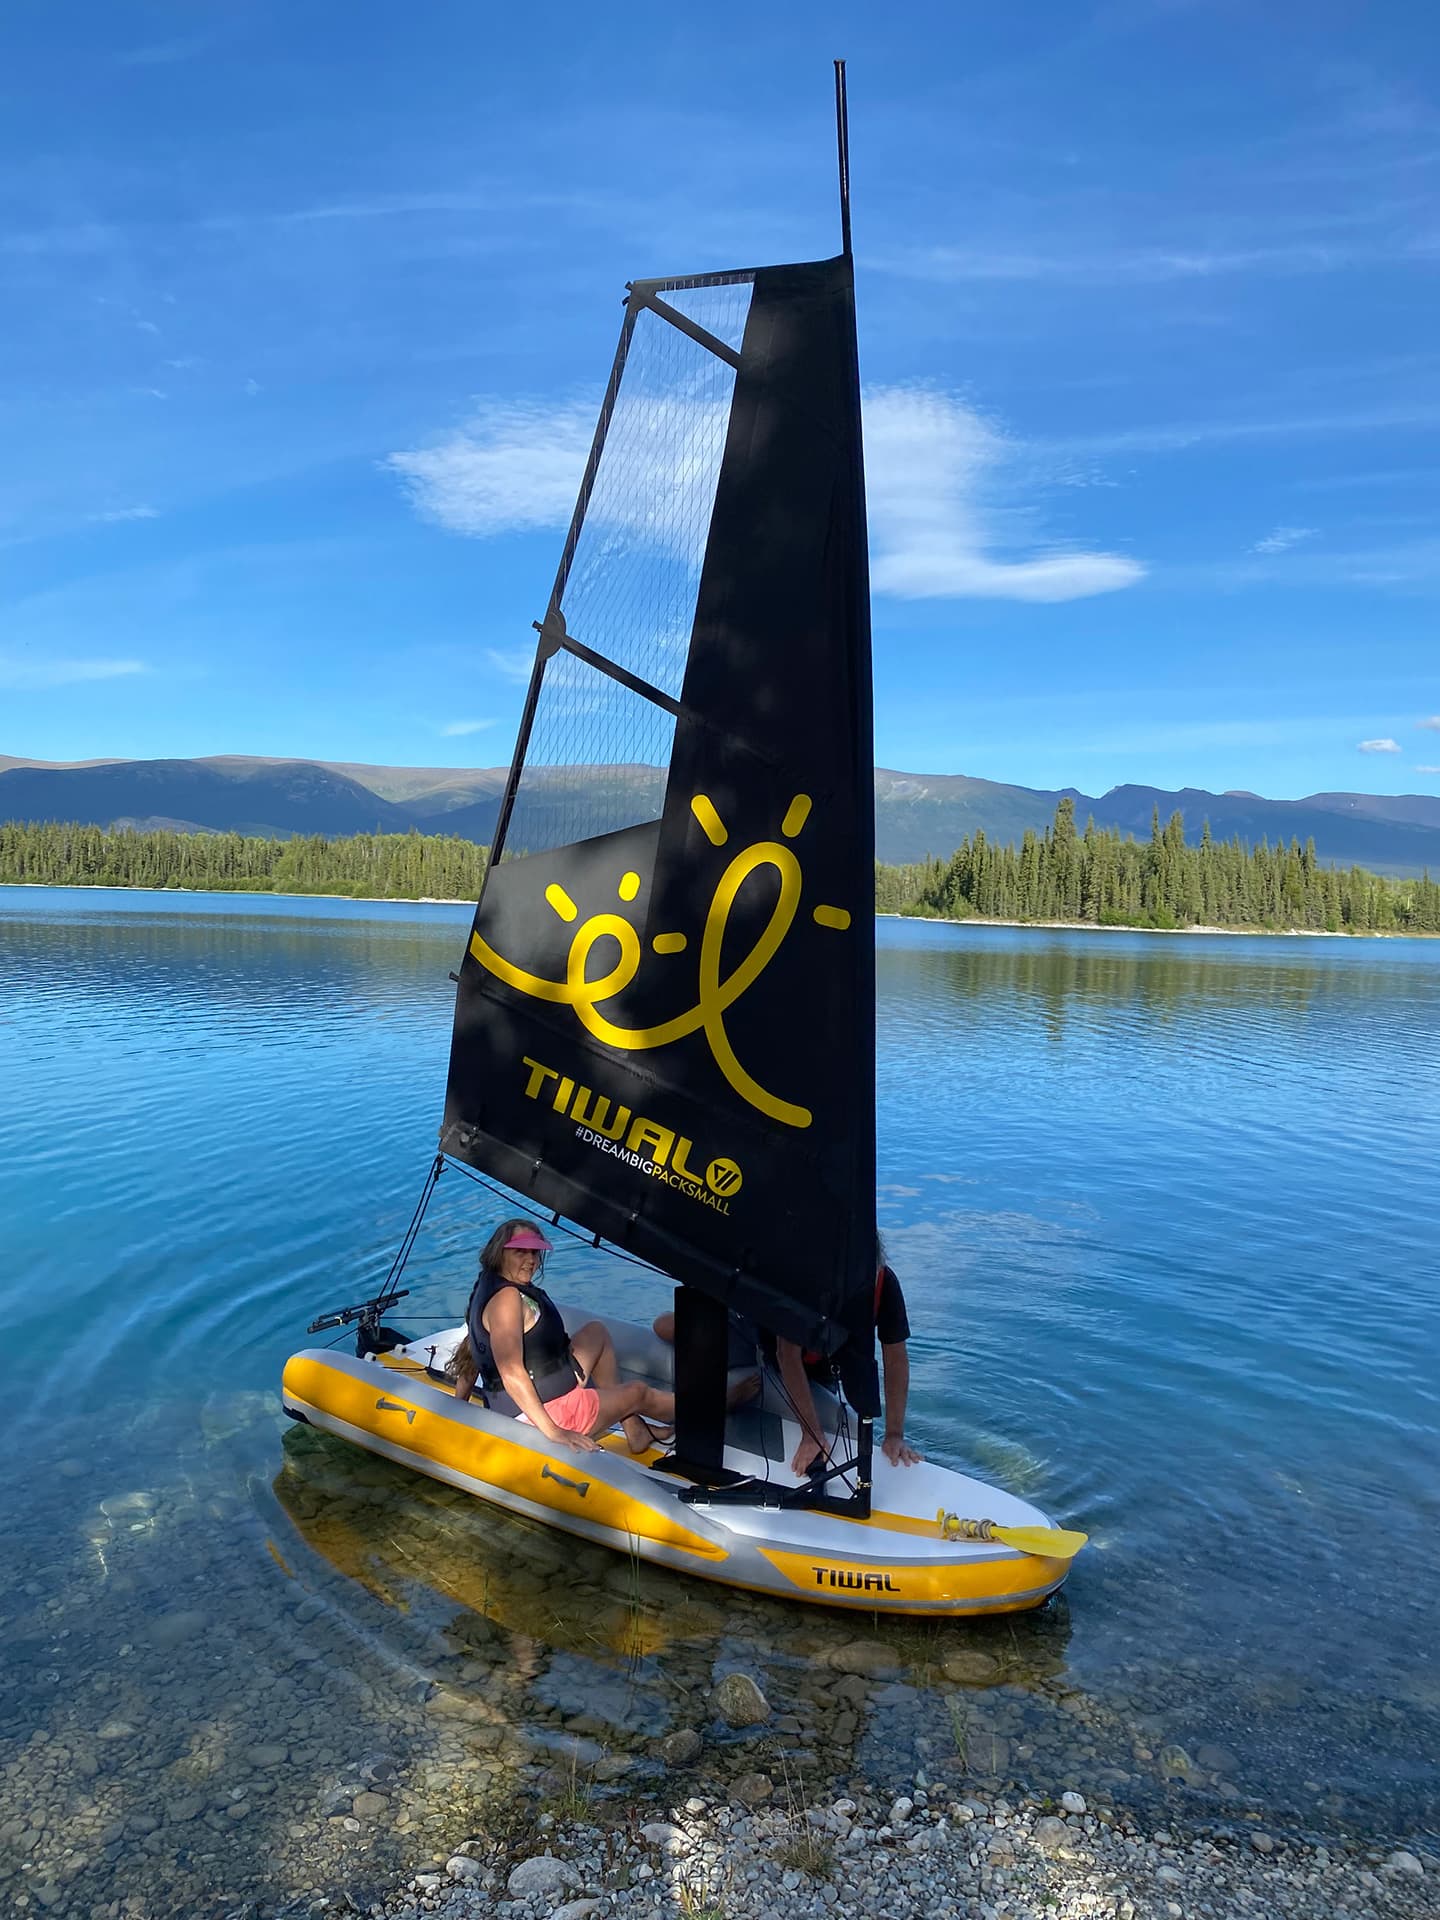 Reefed family dinghy